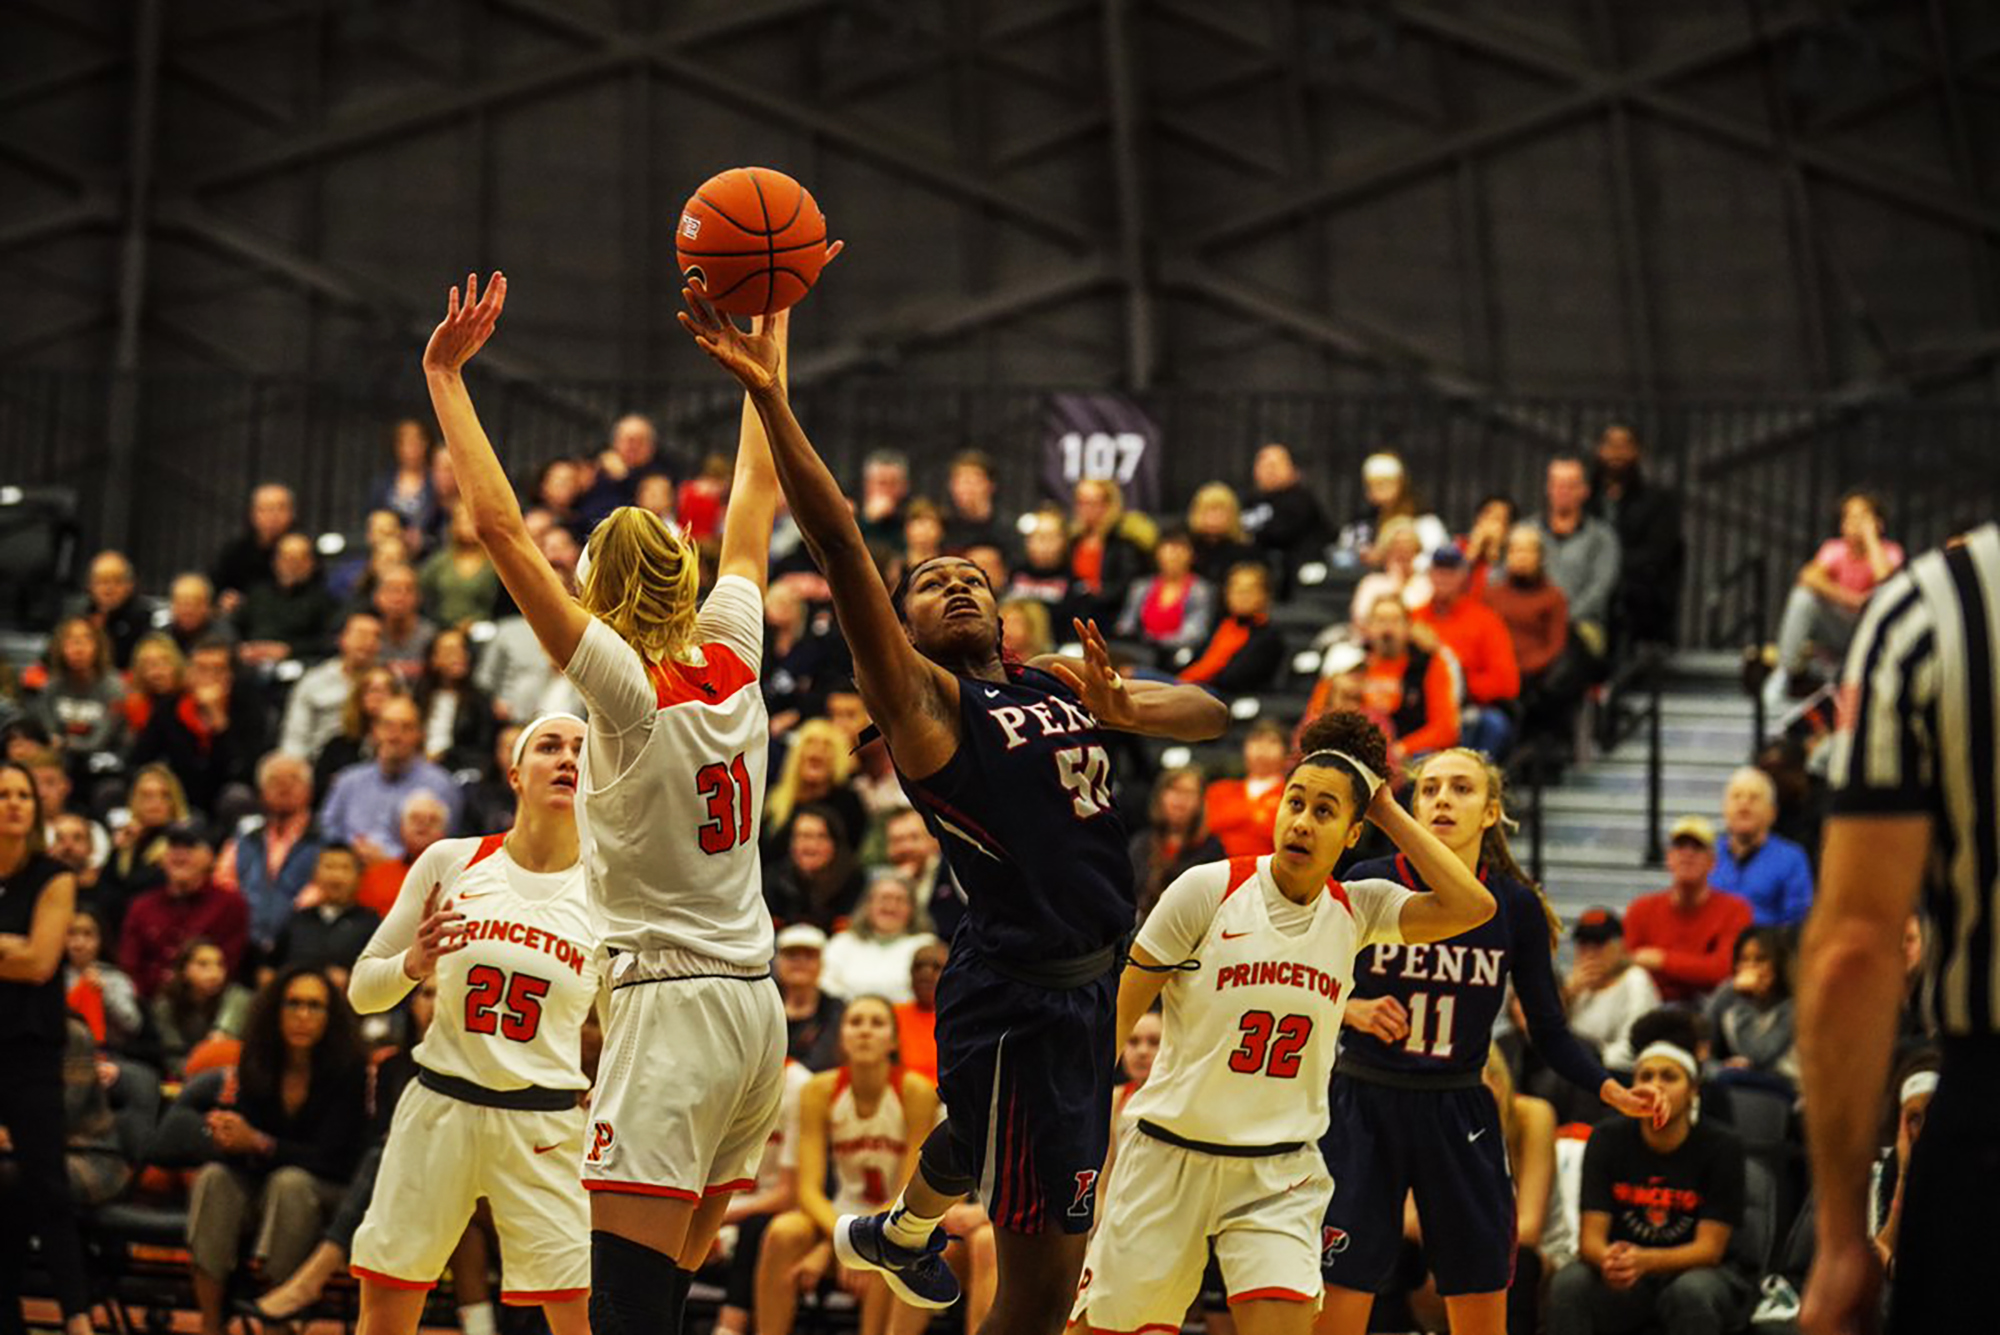 Senior forward Princess Aghayere shoots a tough shot against Princeton in New Jersey.